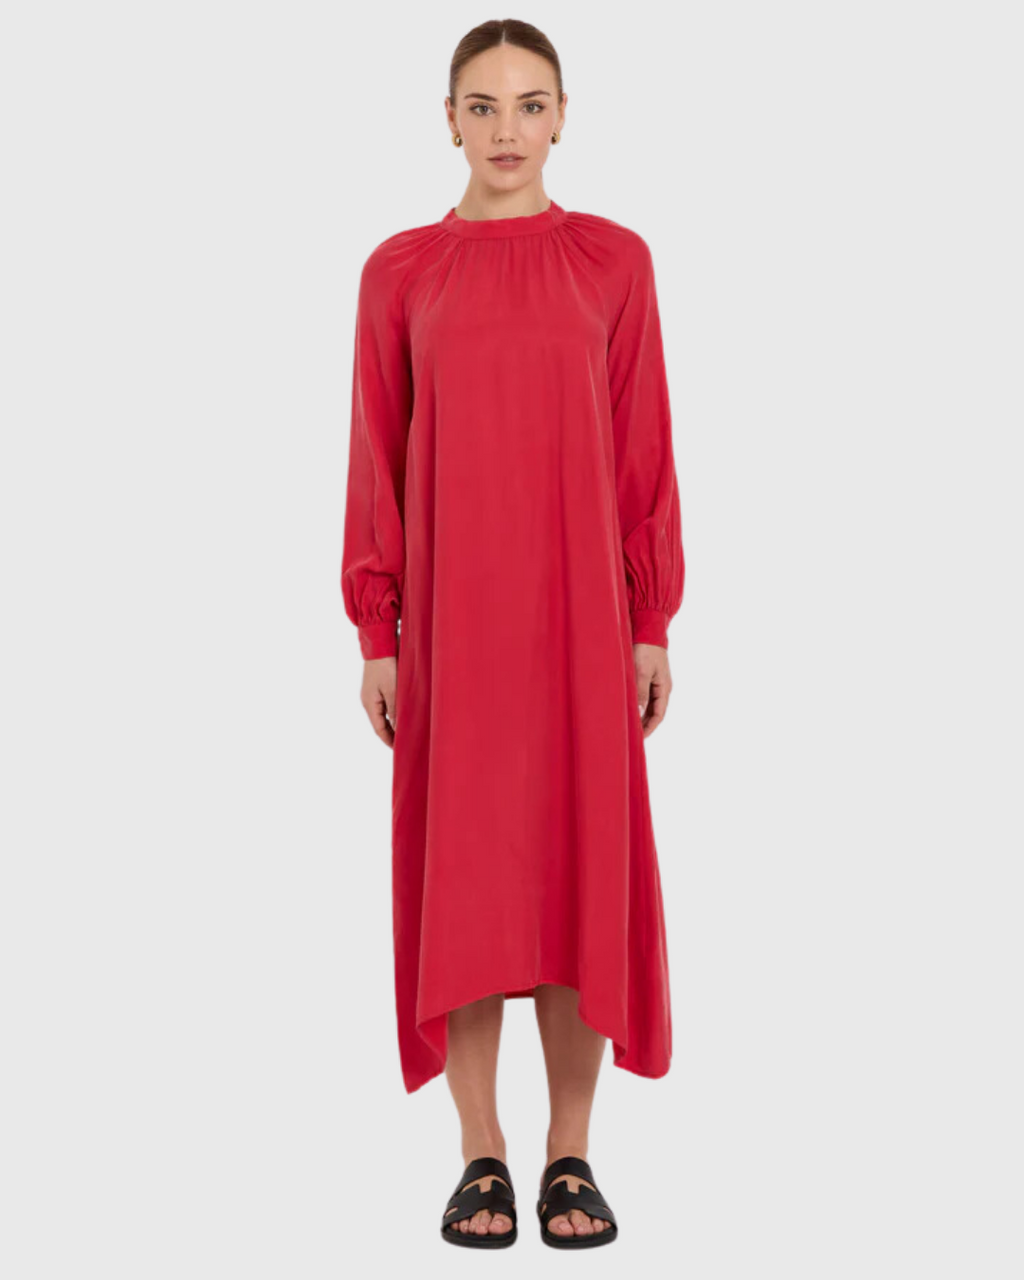 tuesday elsie dress raceday red